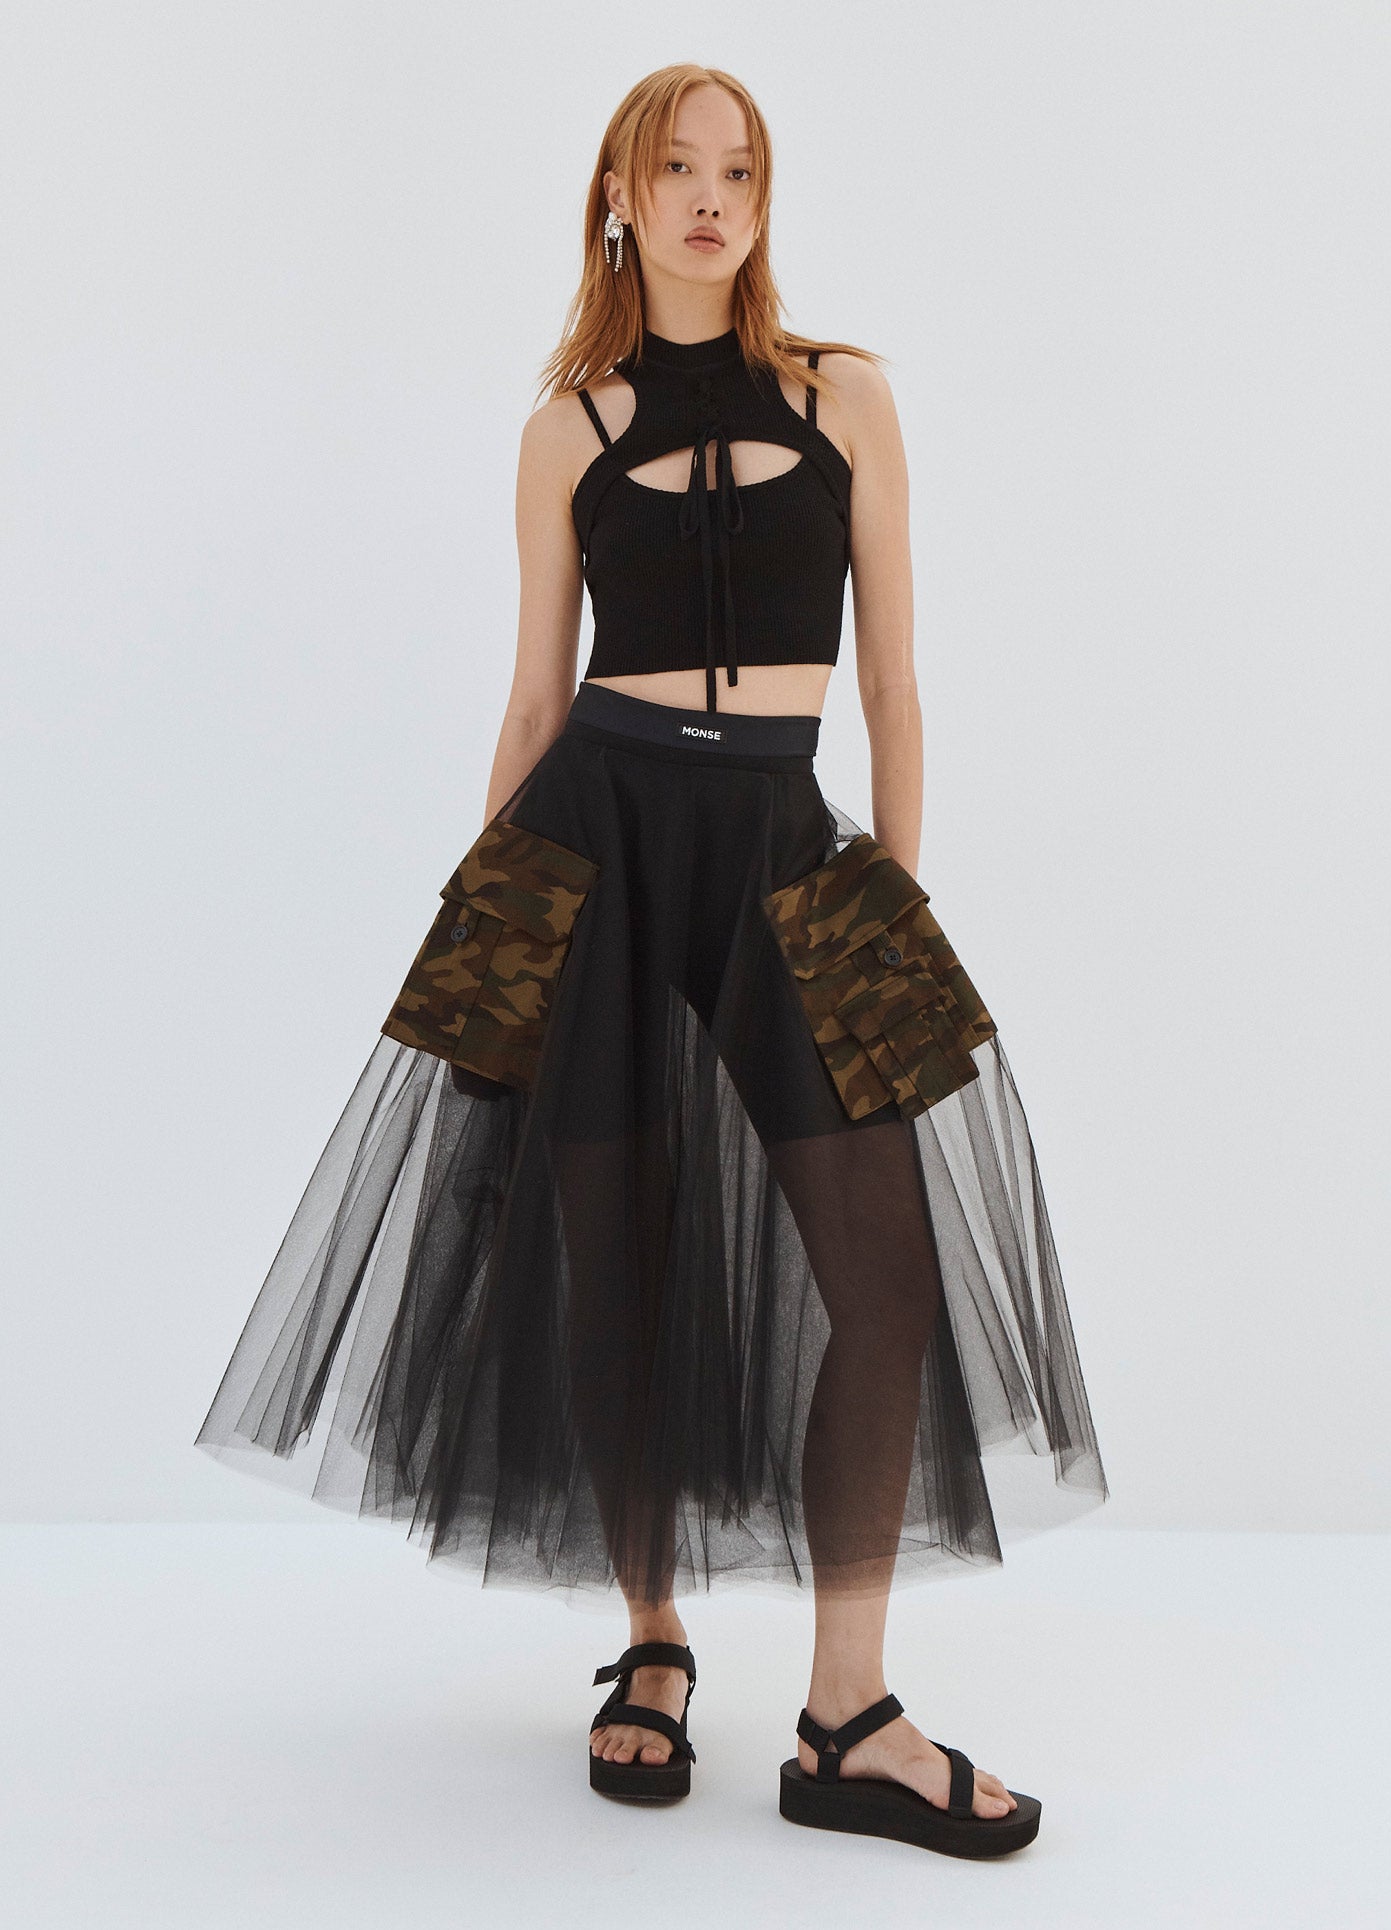 MONSE Tulle Circle Skirt with Cargo Pockets in Black and Camo on Model Full Front View